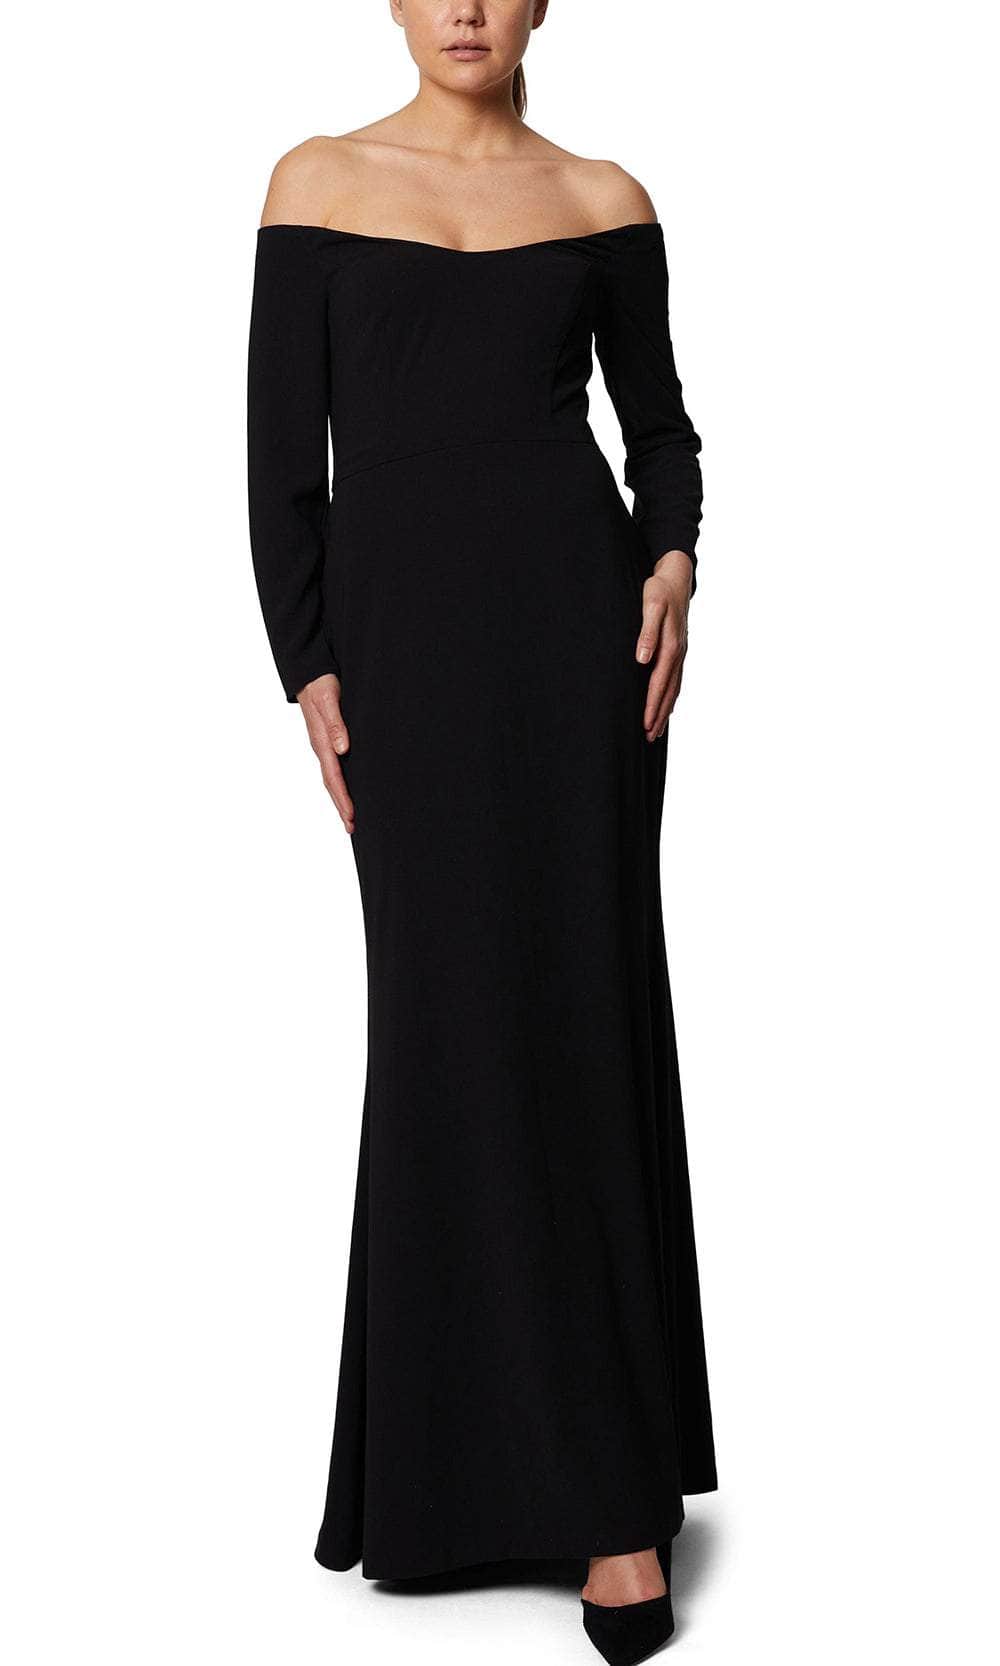 Laundry HU07D51 - Long Sleeve Formal Gown
